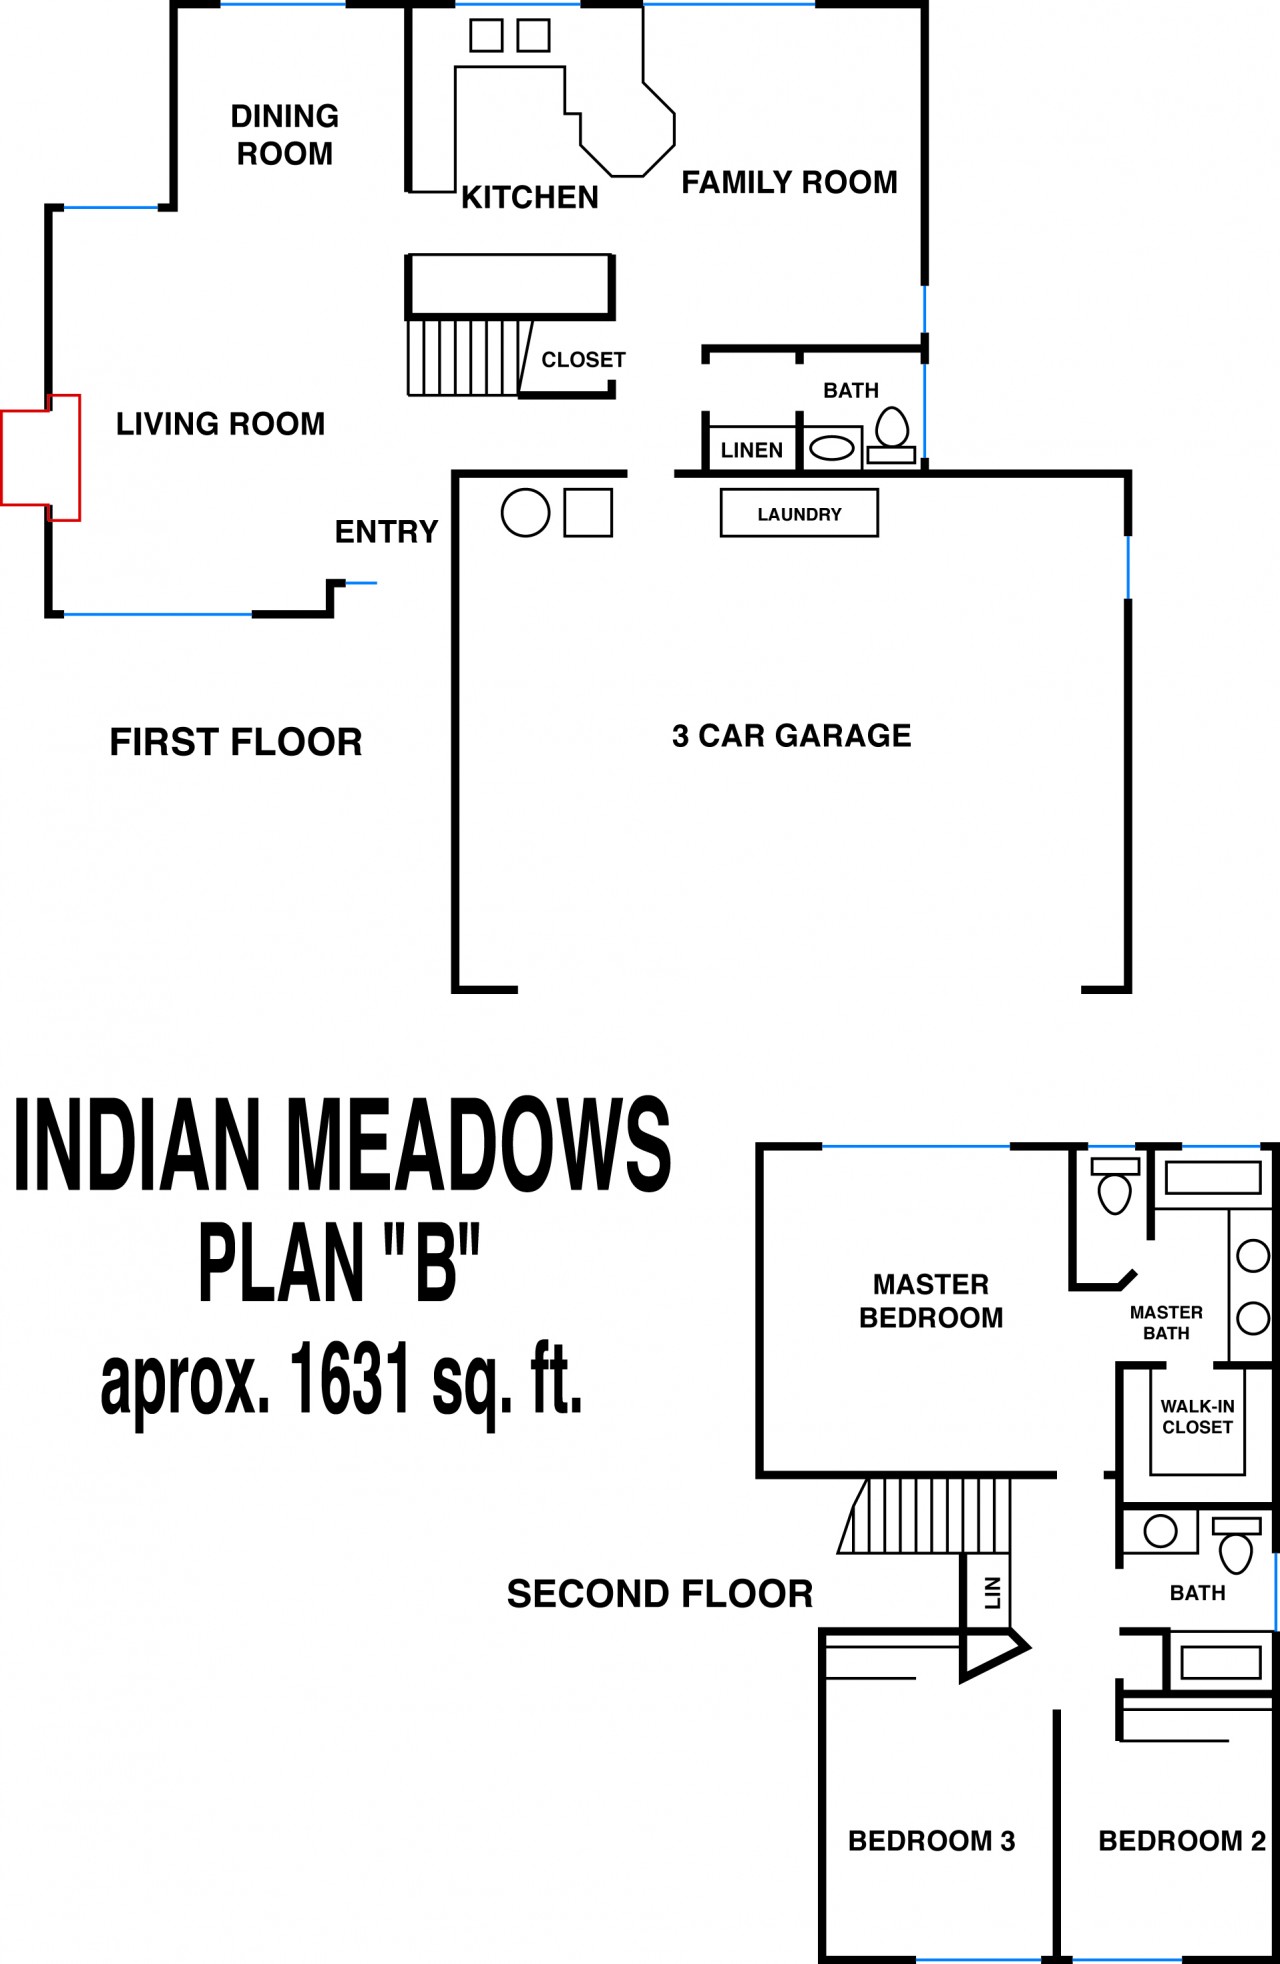 Simi Valley Indian Hill Indian Meadows Tract Floor Plan B